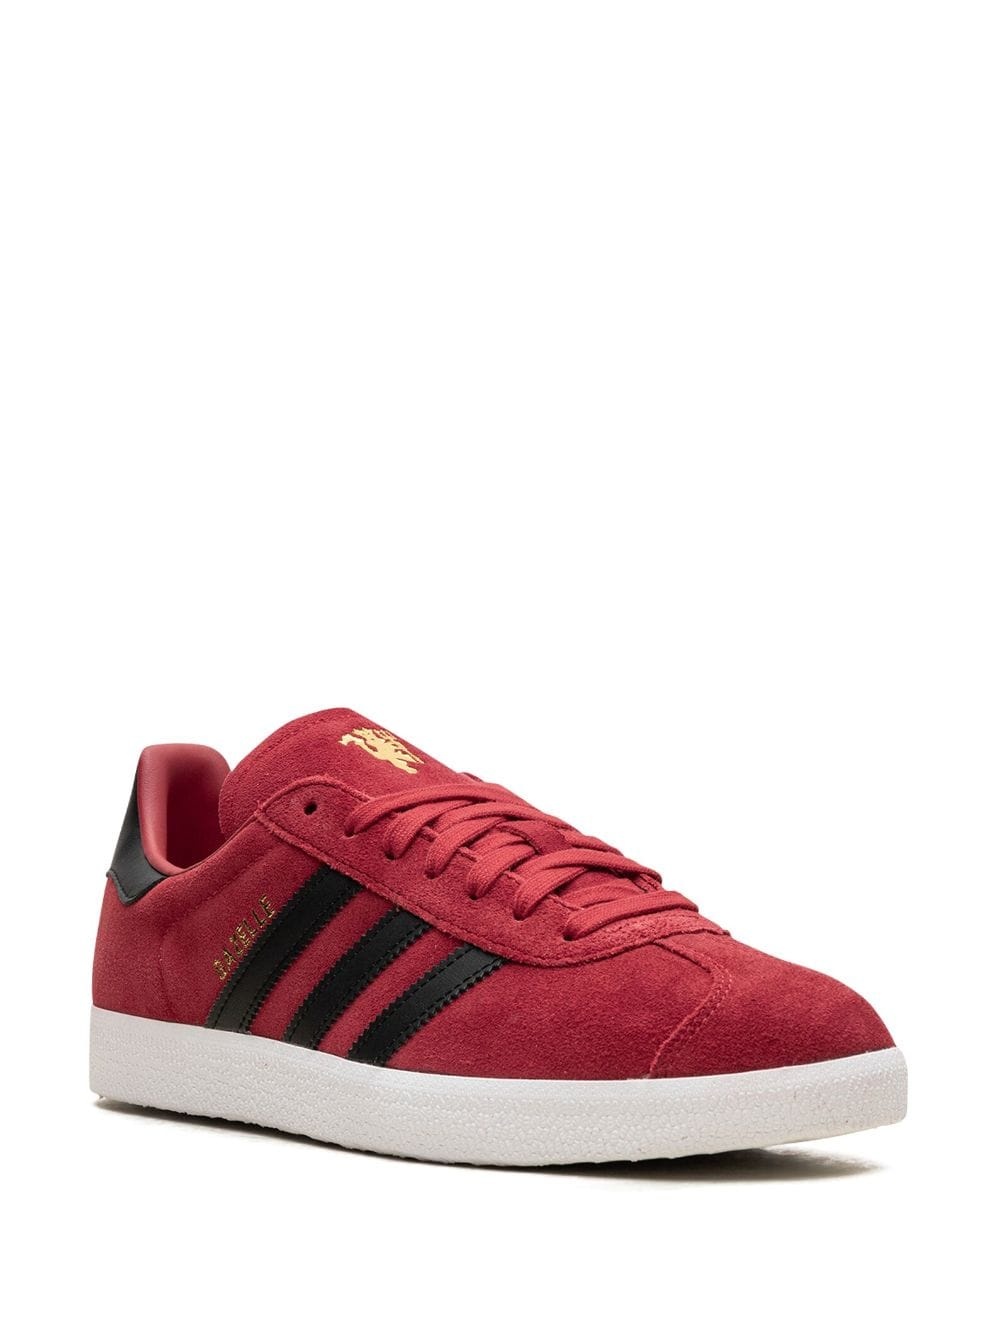 Gazelle "Manchester United" sneakers - 2